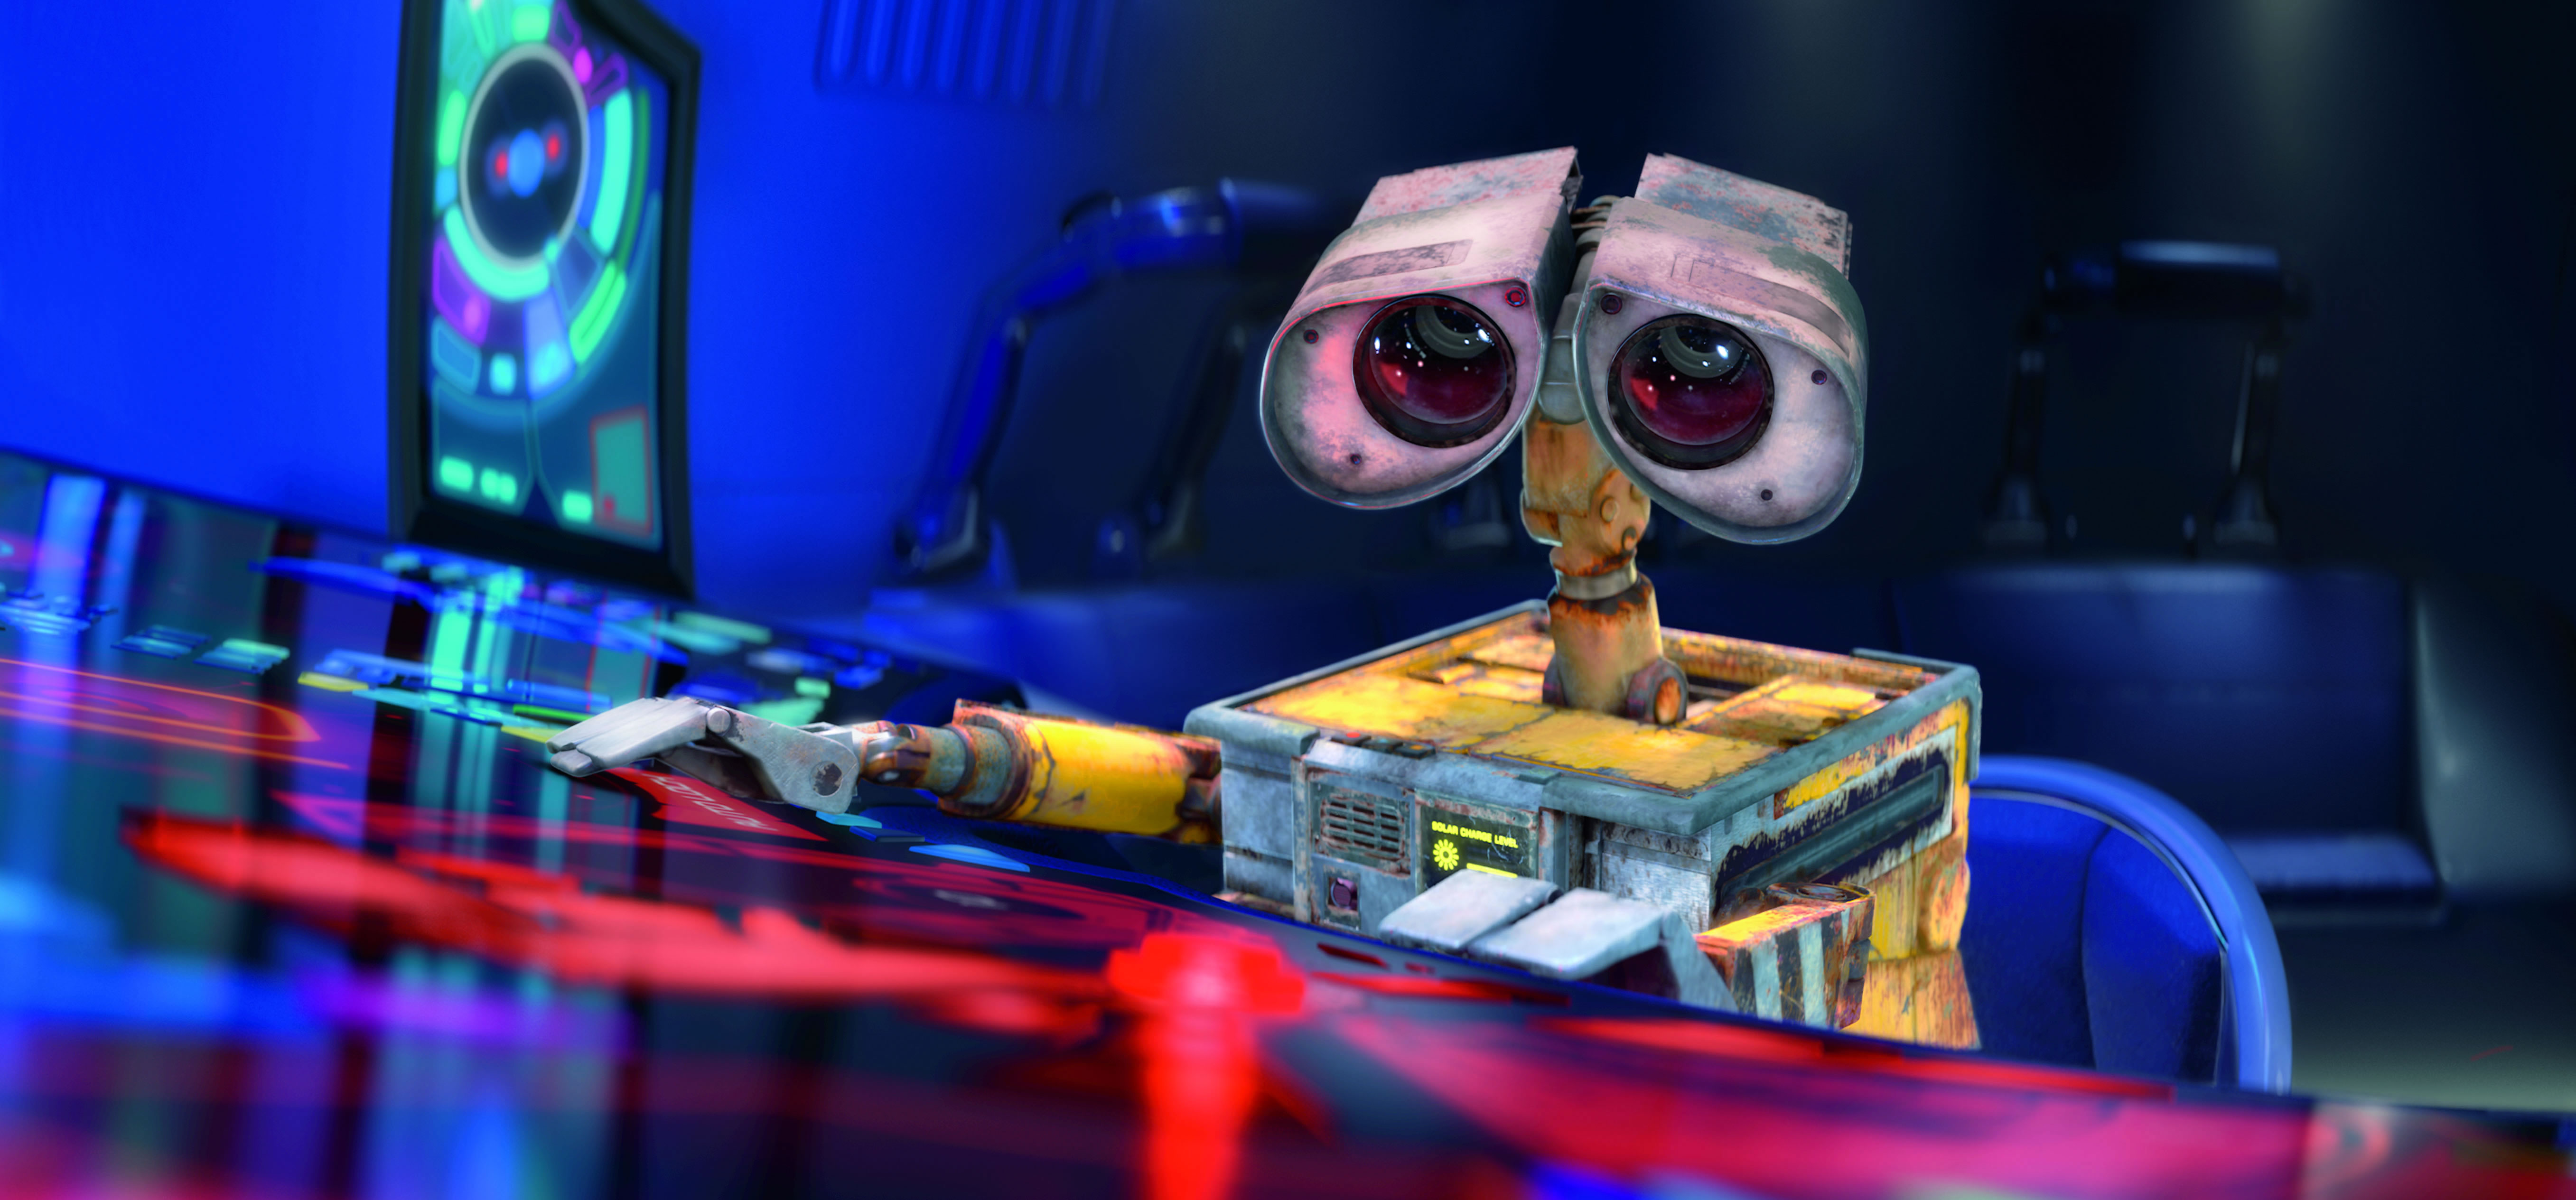 Wall-E, a lovable Pixar character, a robot in the movie Wall·E. This 4k desktop wallpaper showcases Wall-E's charm.